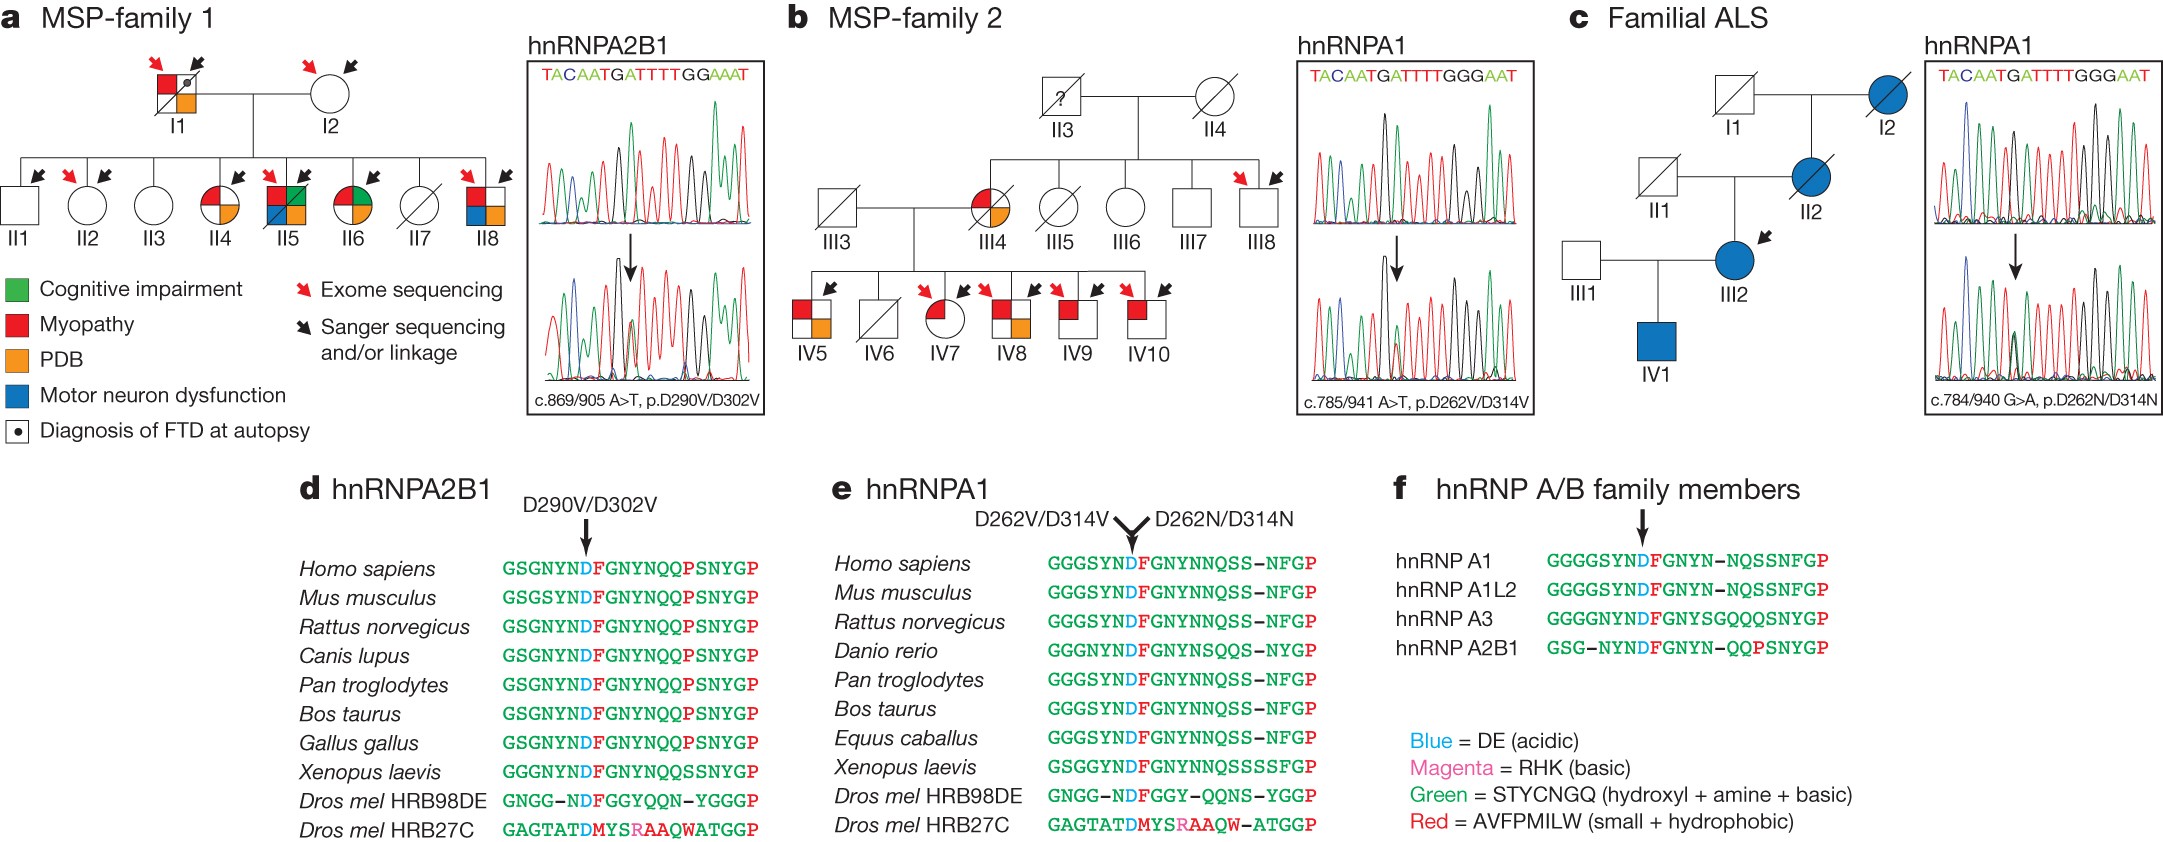 Mutations in prion-like domains in hnRNPA2B1 and hnRNPA1 cause multisystem  proteinopathy and ALS | Nature